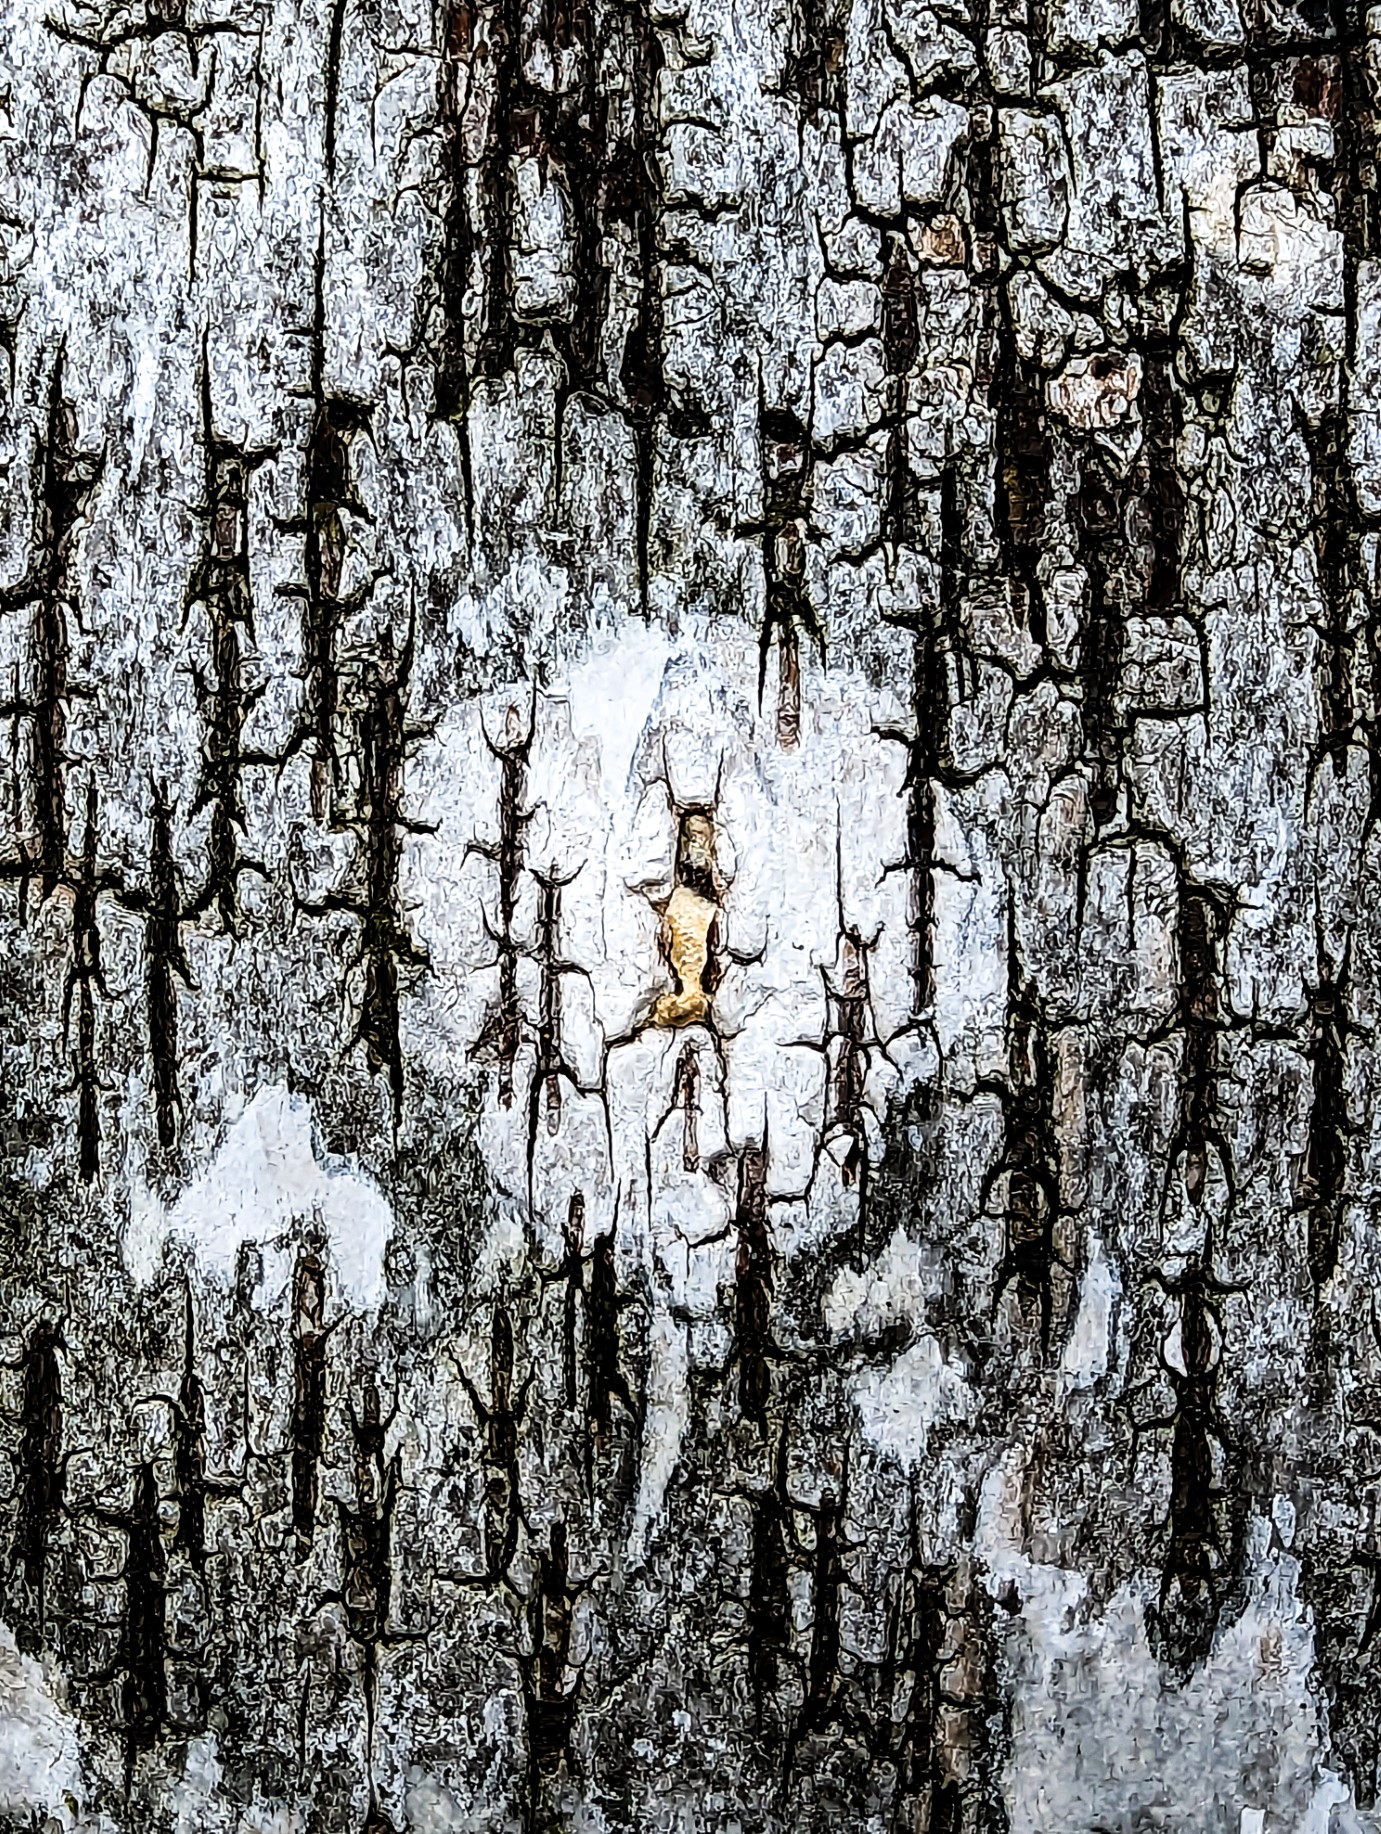 The white and black bark of a birch tree up close. In the centre of the photo is a strange bright white circle visible with a touch of orange.